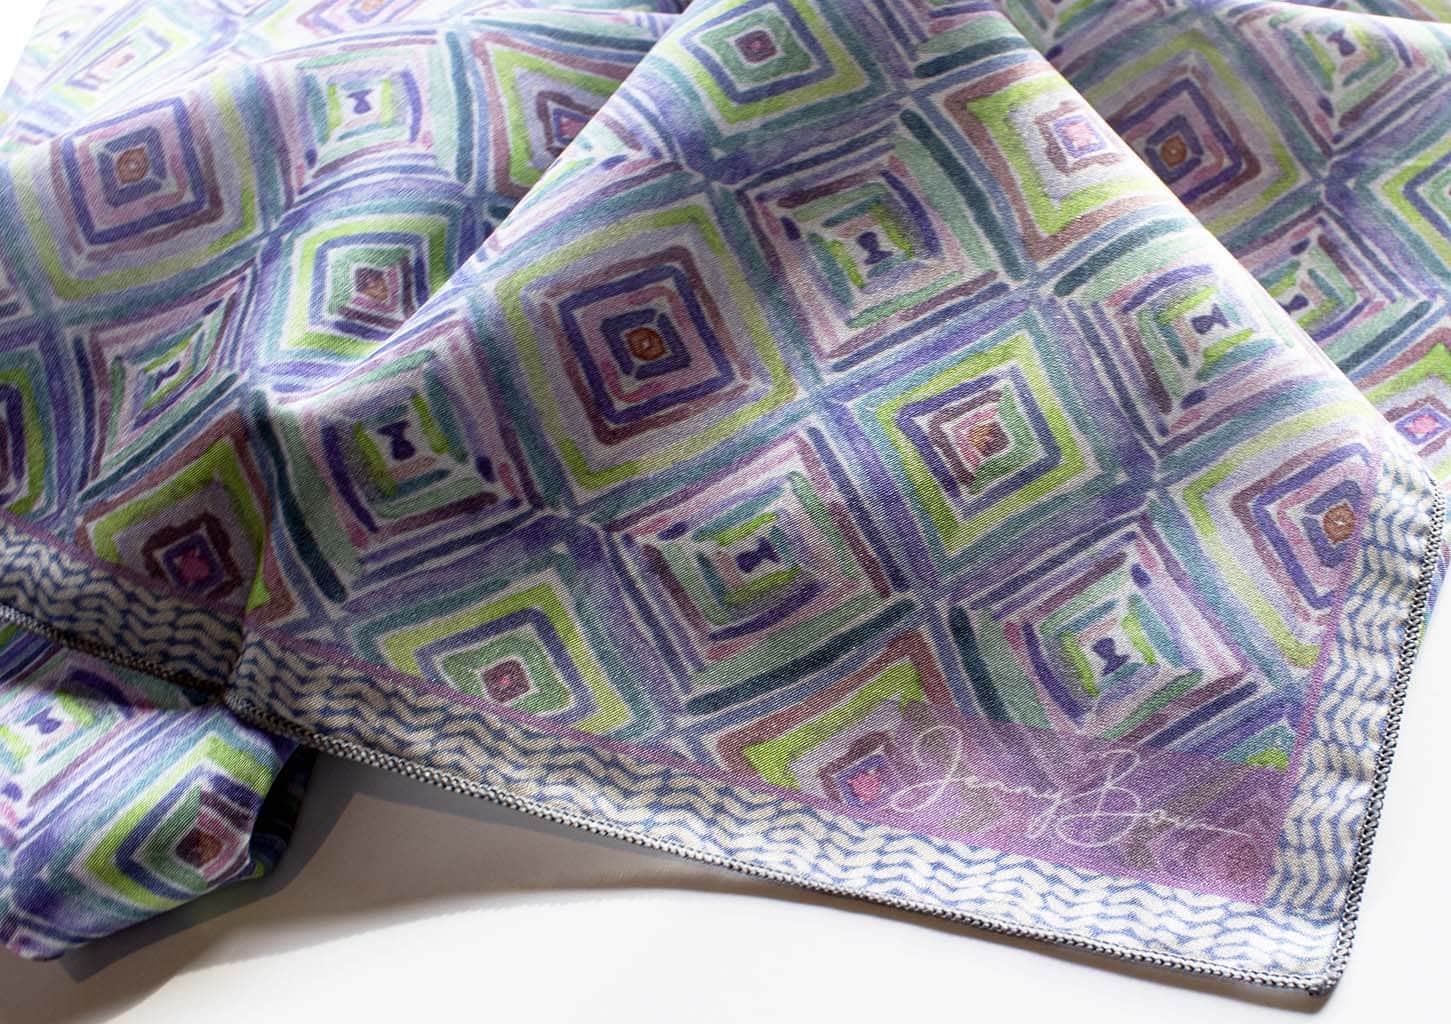 corner detail of a silk scarf with a blue, green, and purple watercolor geometric design. The Jenny Bova logo is printed on the corner shown.